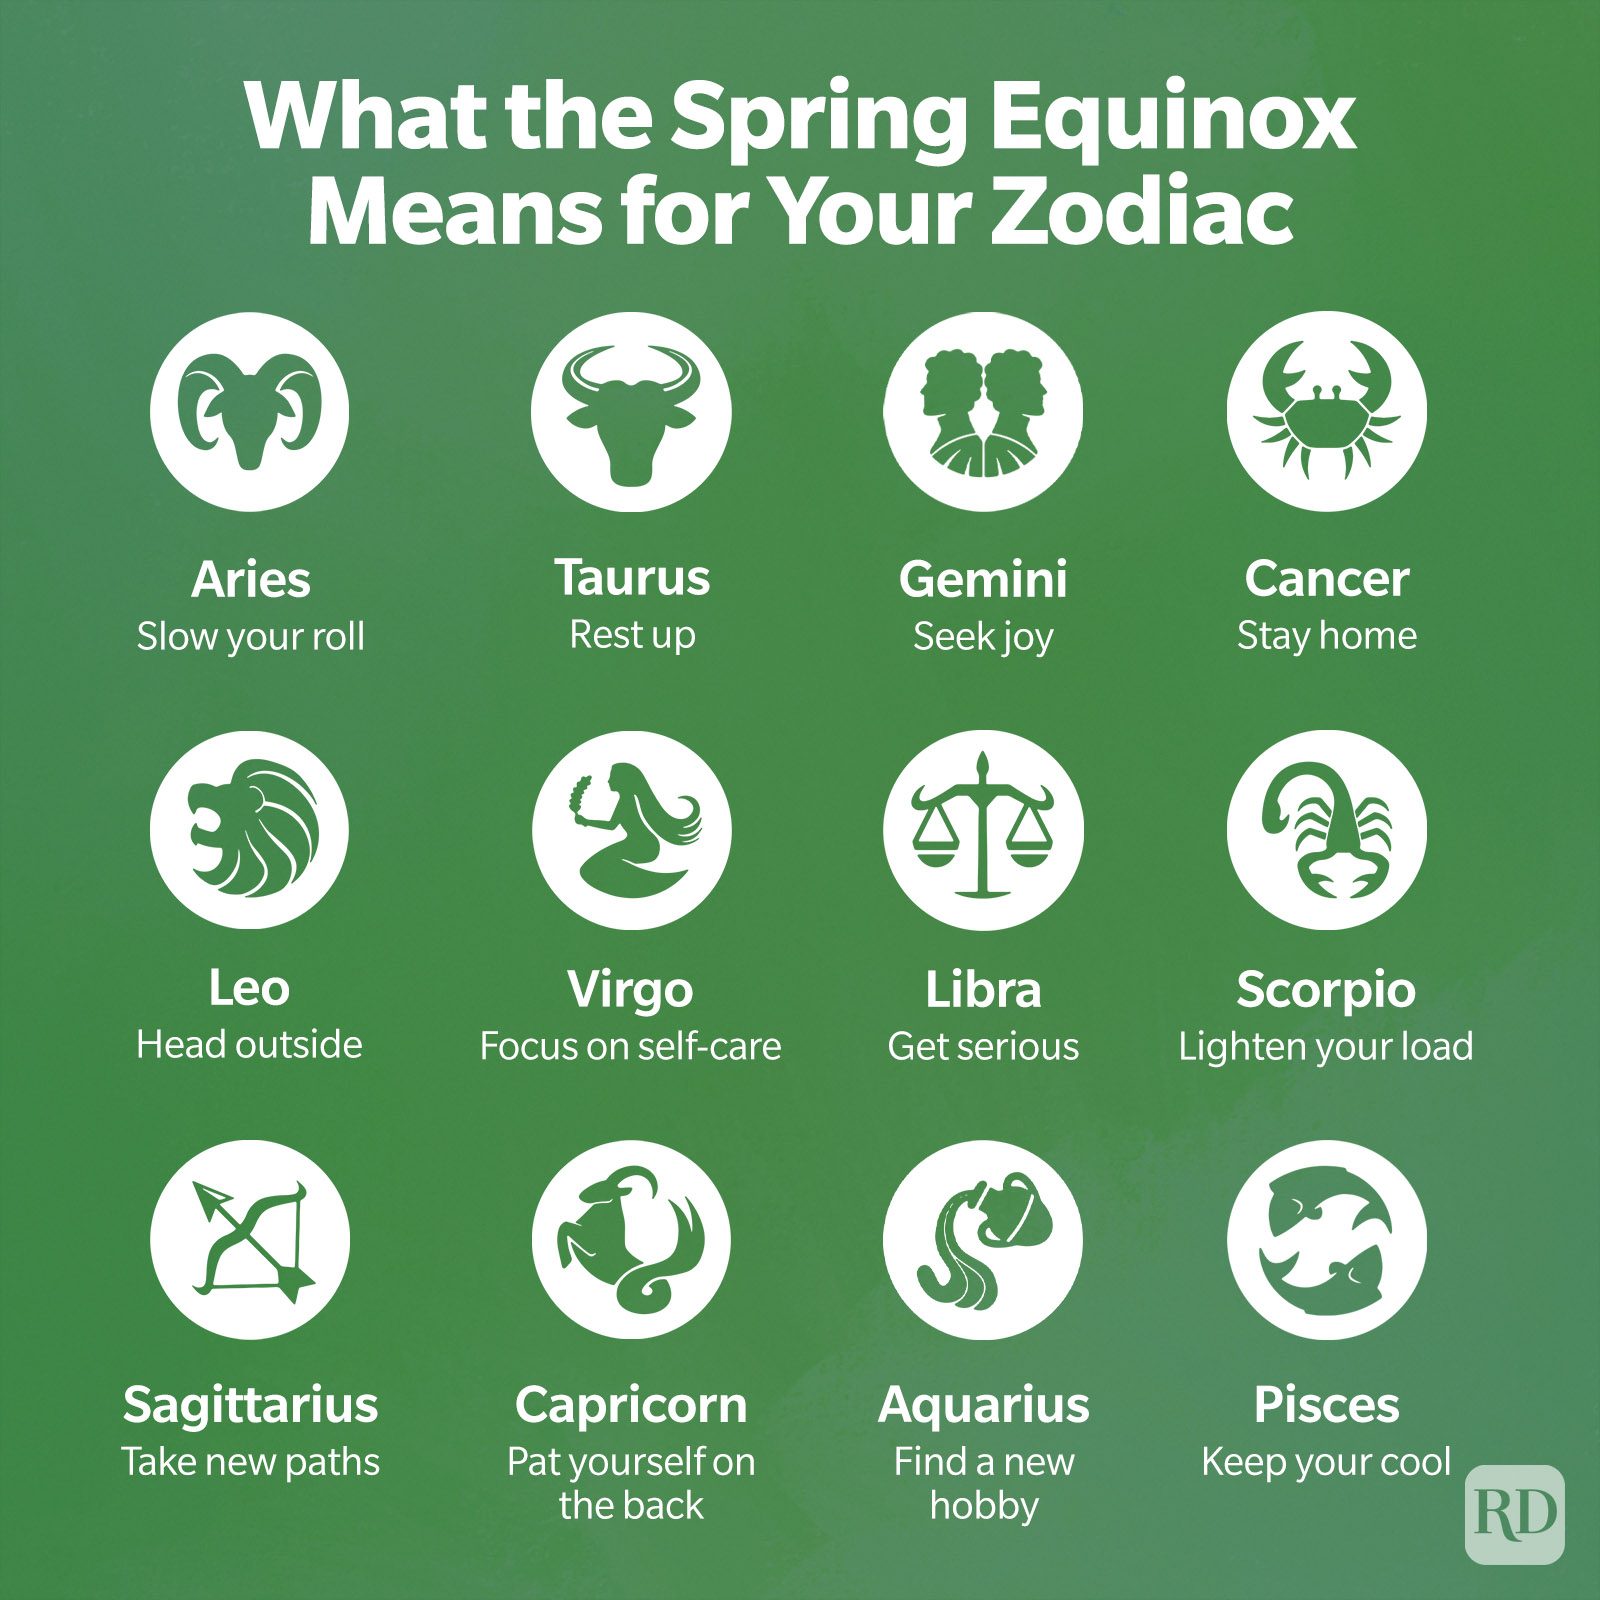 What the Spring Equinox Means for Your Zodiac Sign